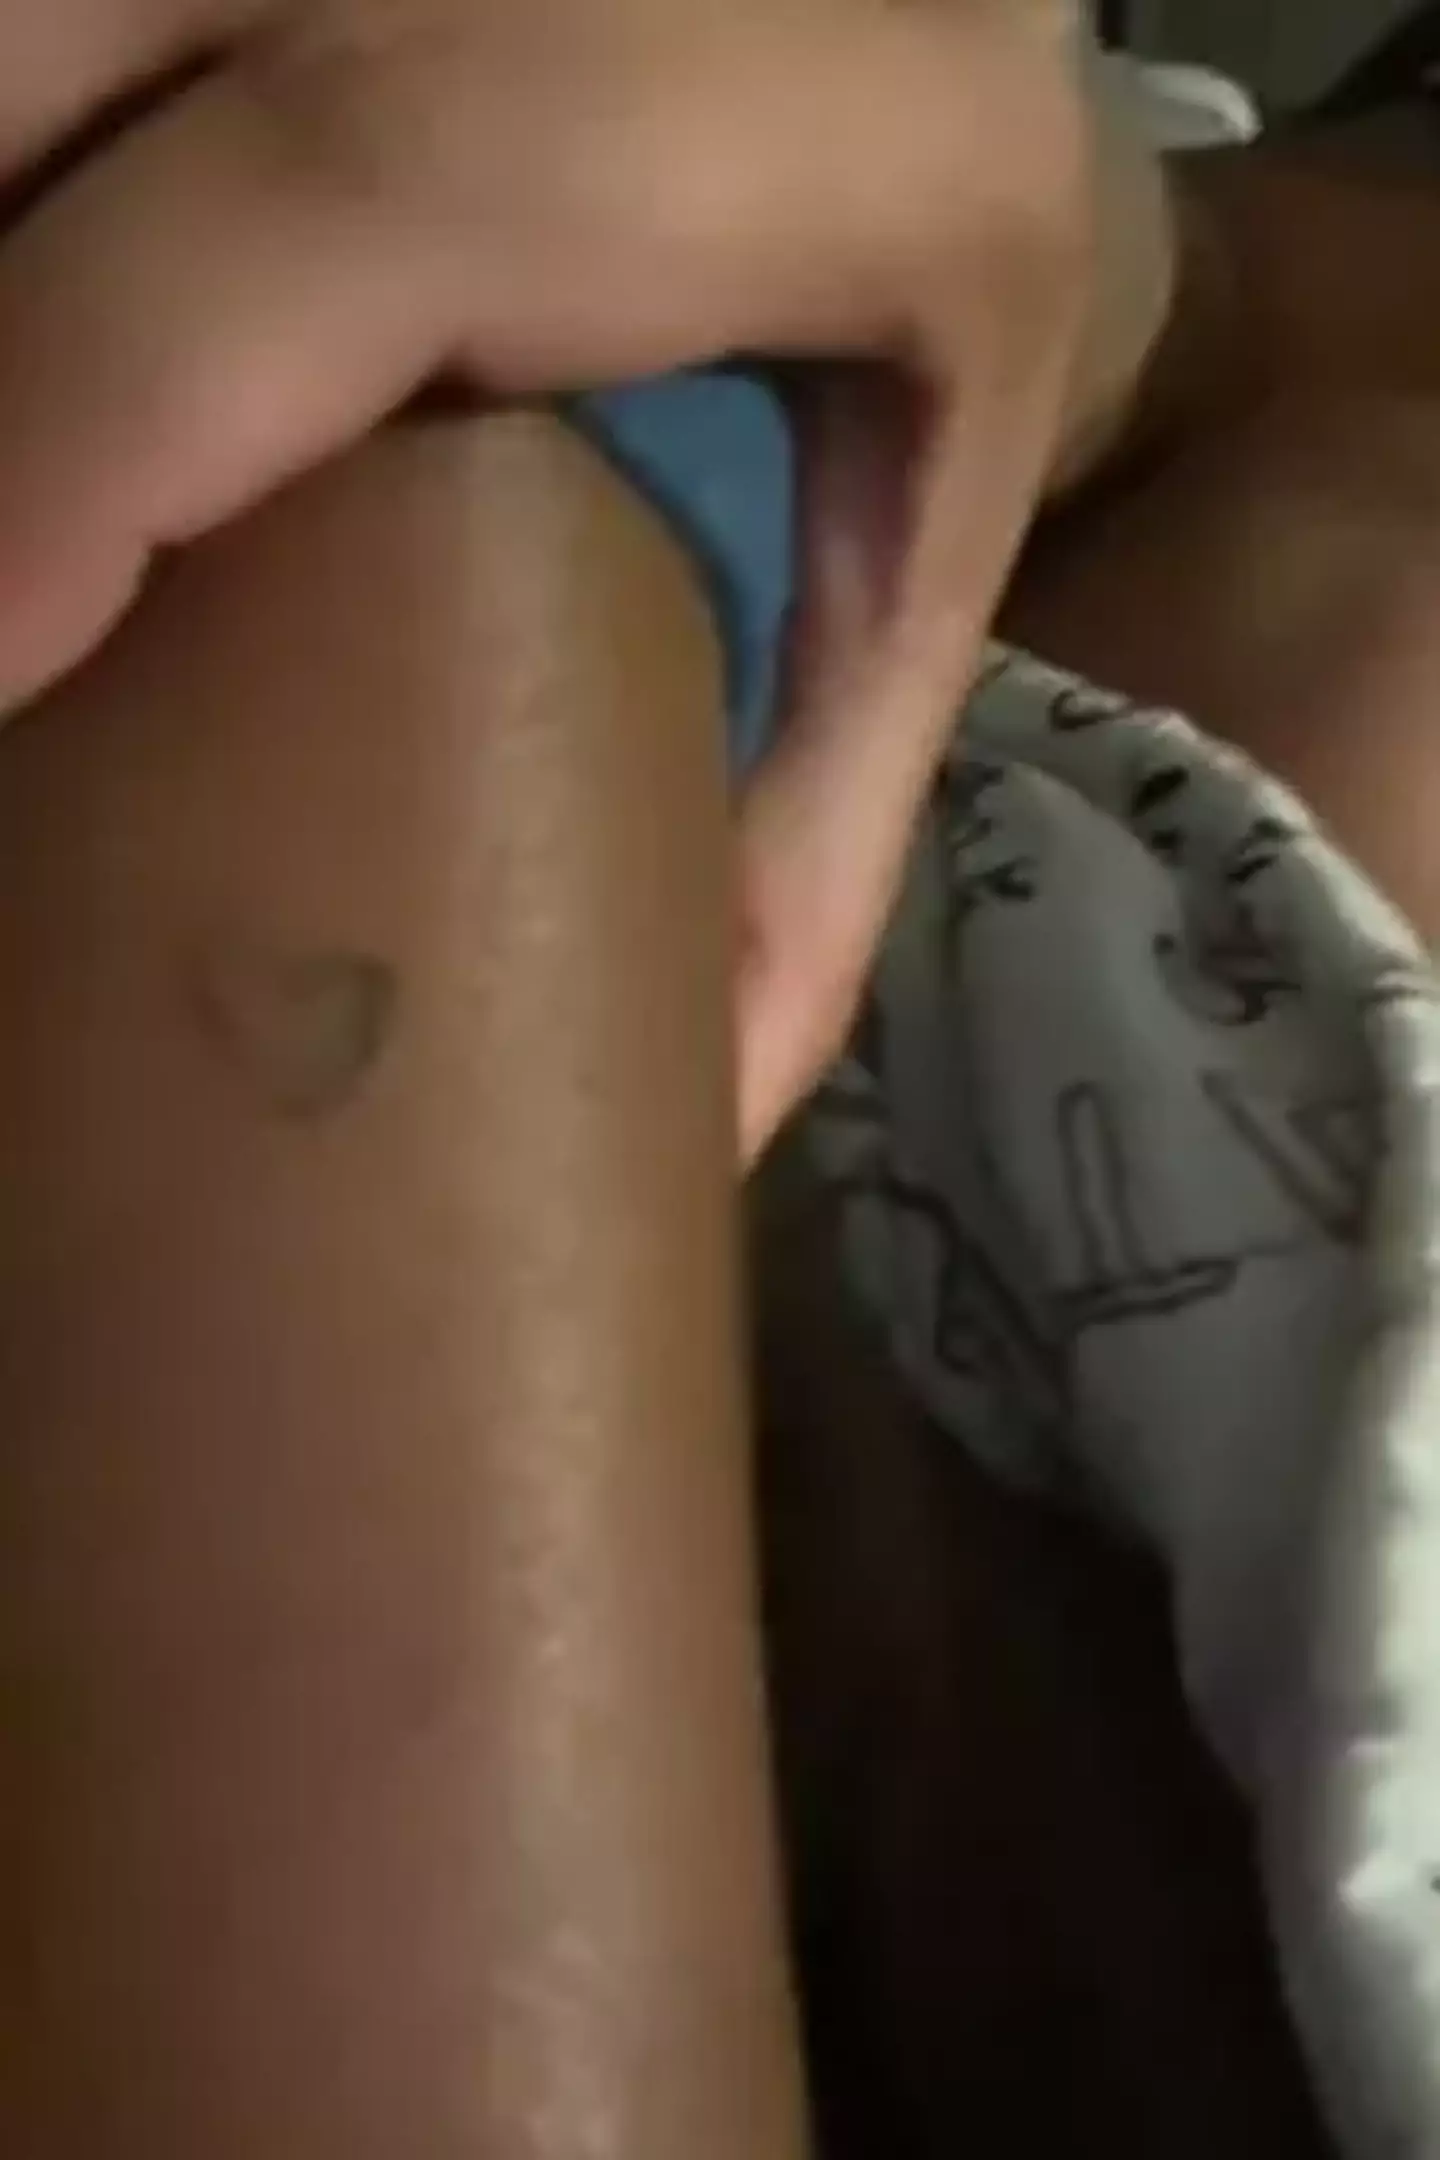 Here's what she found on her daughter's leg.